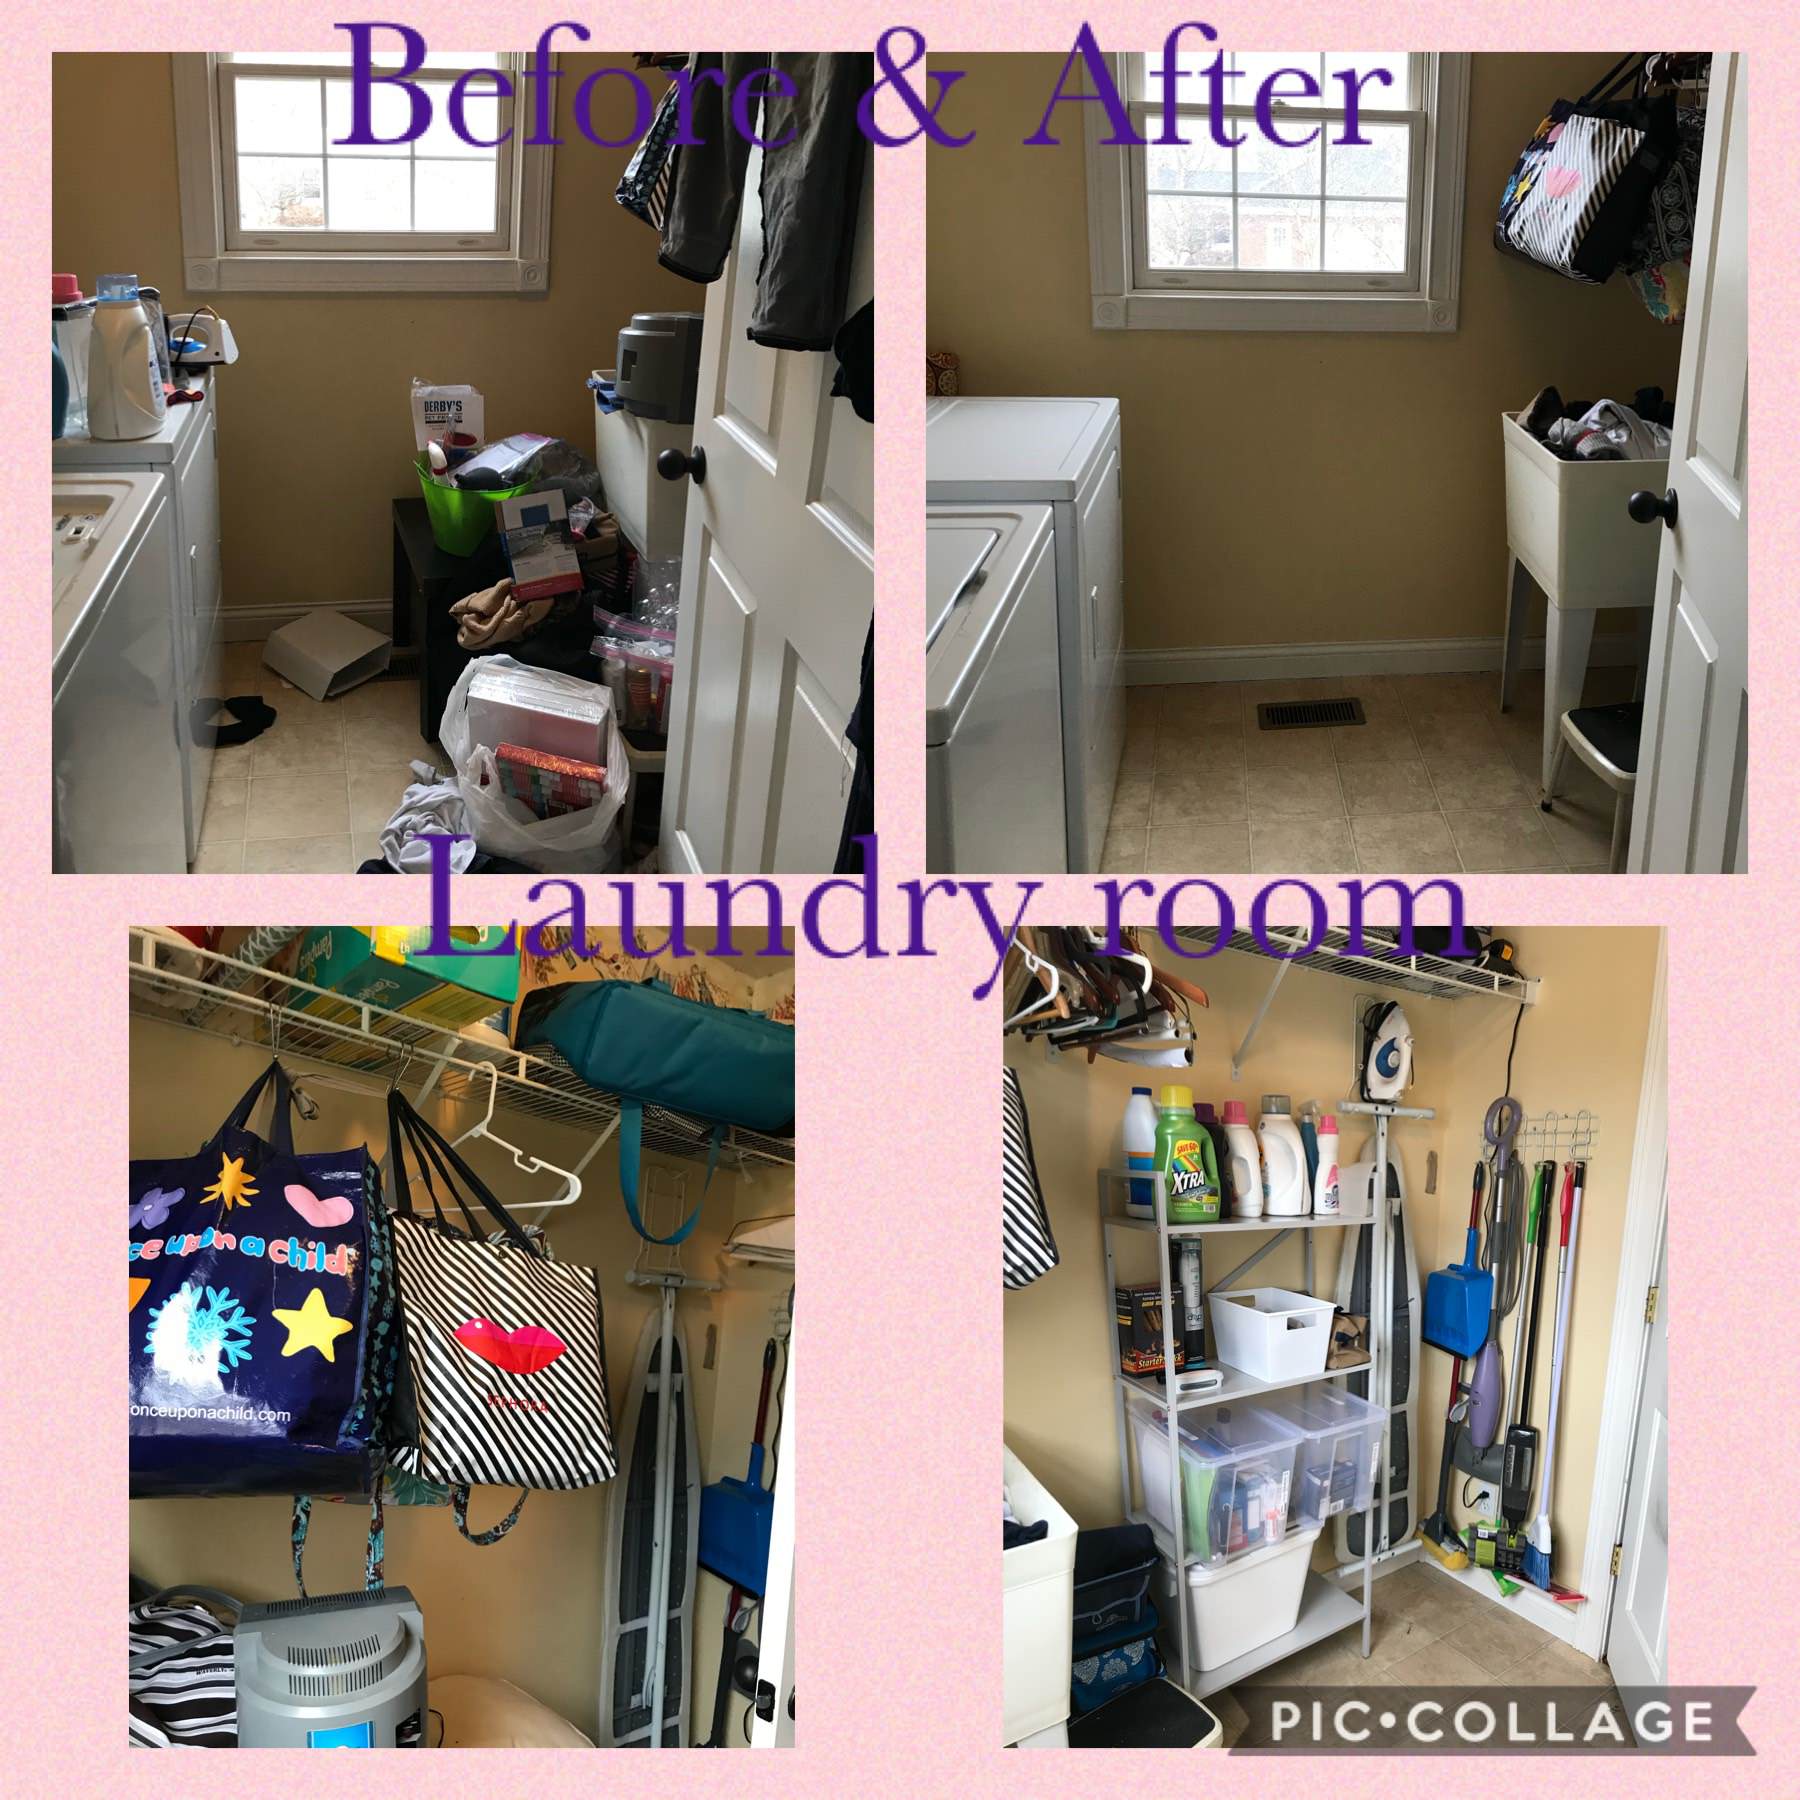 Laundry room before & after